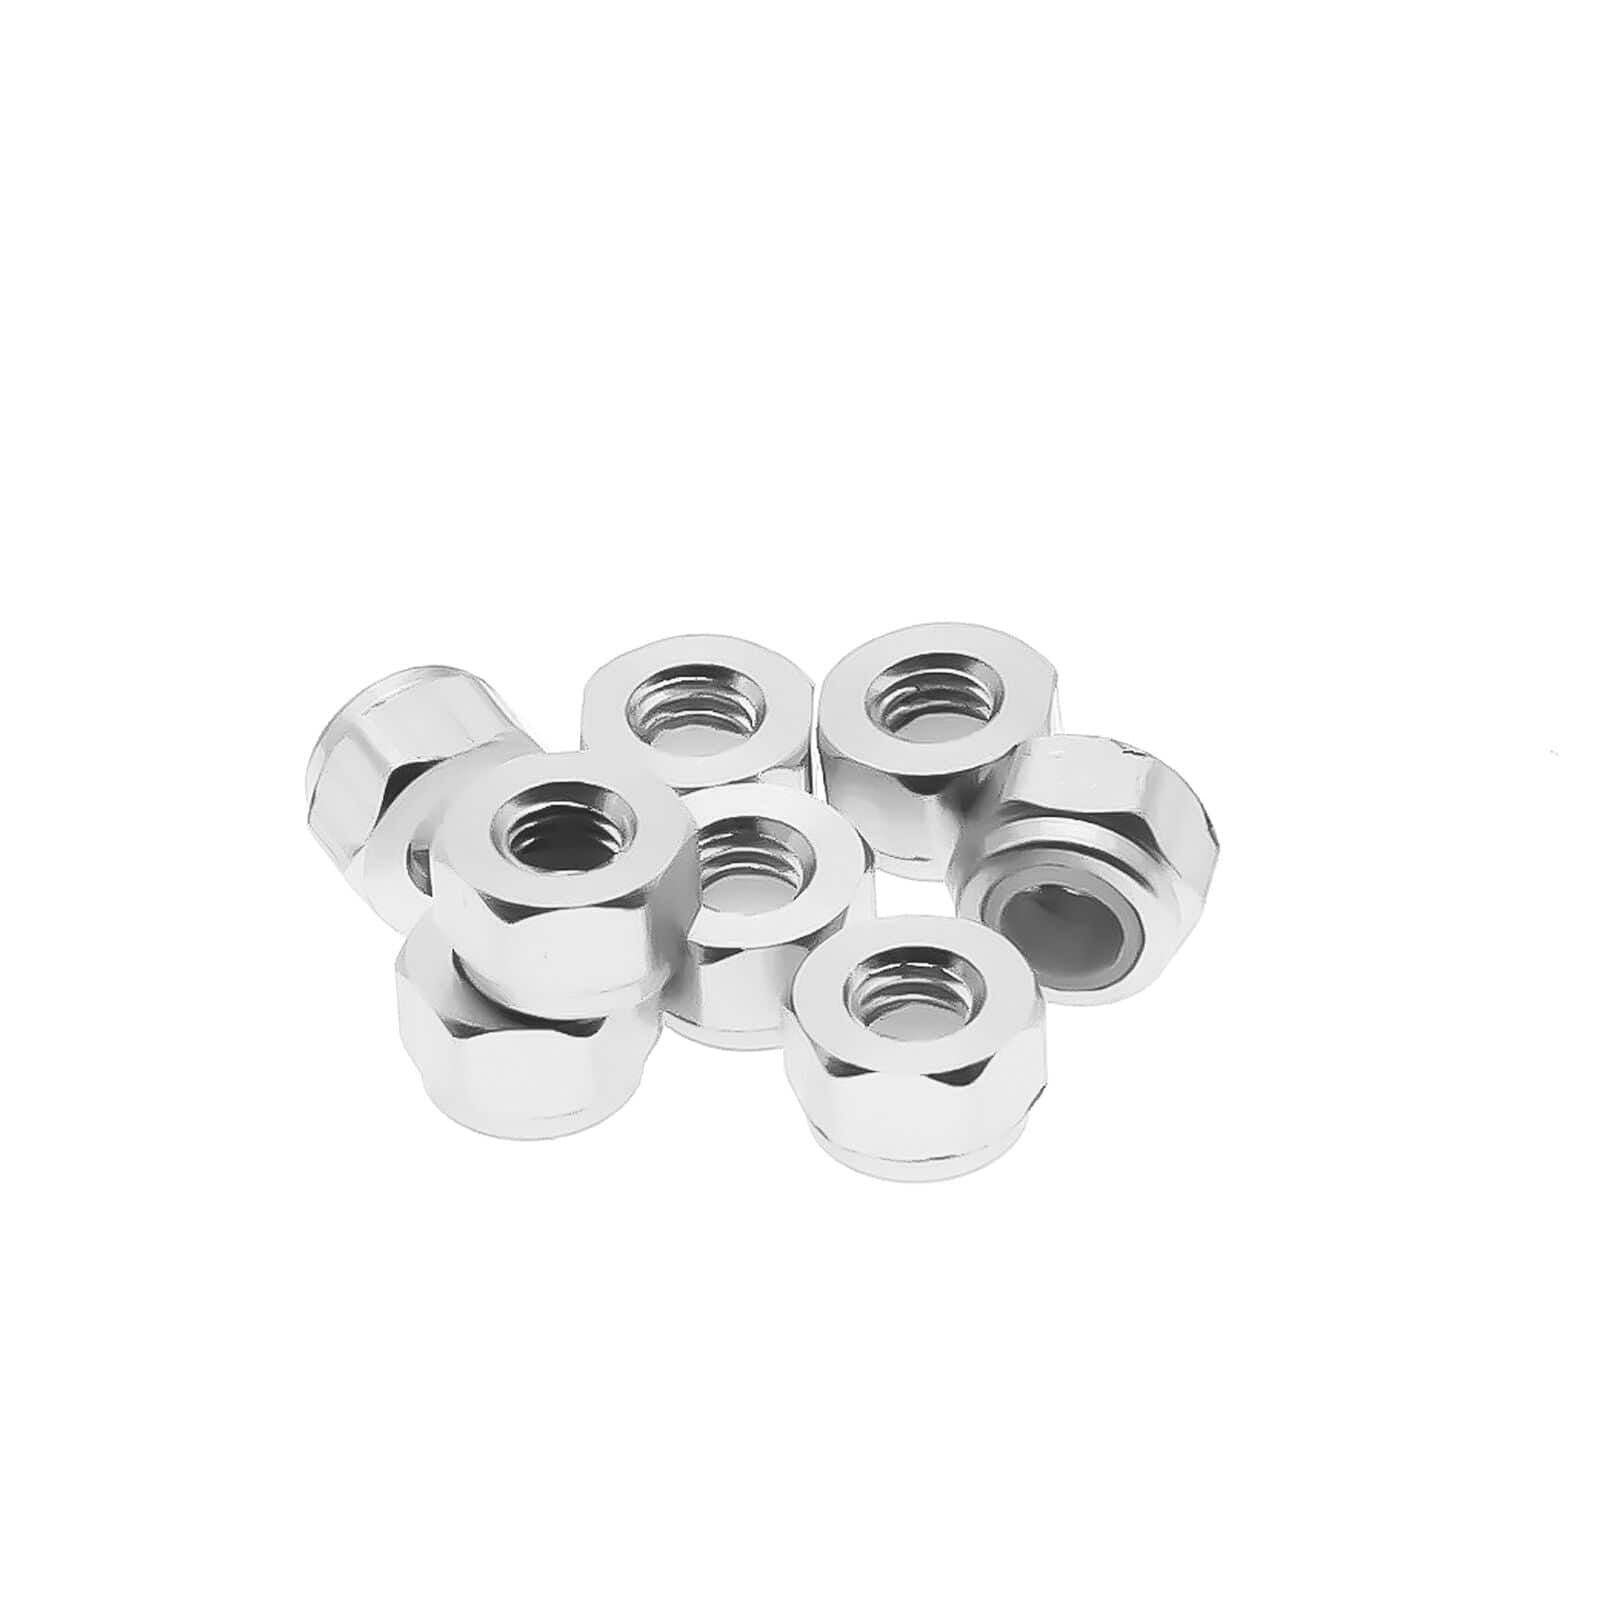 RCAWD ECX UPGRADE PARTS Silver RCAWD M3 Wheel Hex Lock Nut Tire Nut ECX1059 For RC Hobby Car 1-10 ECX 2WD Series 8PCS